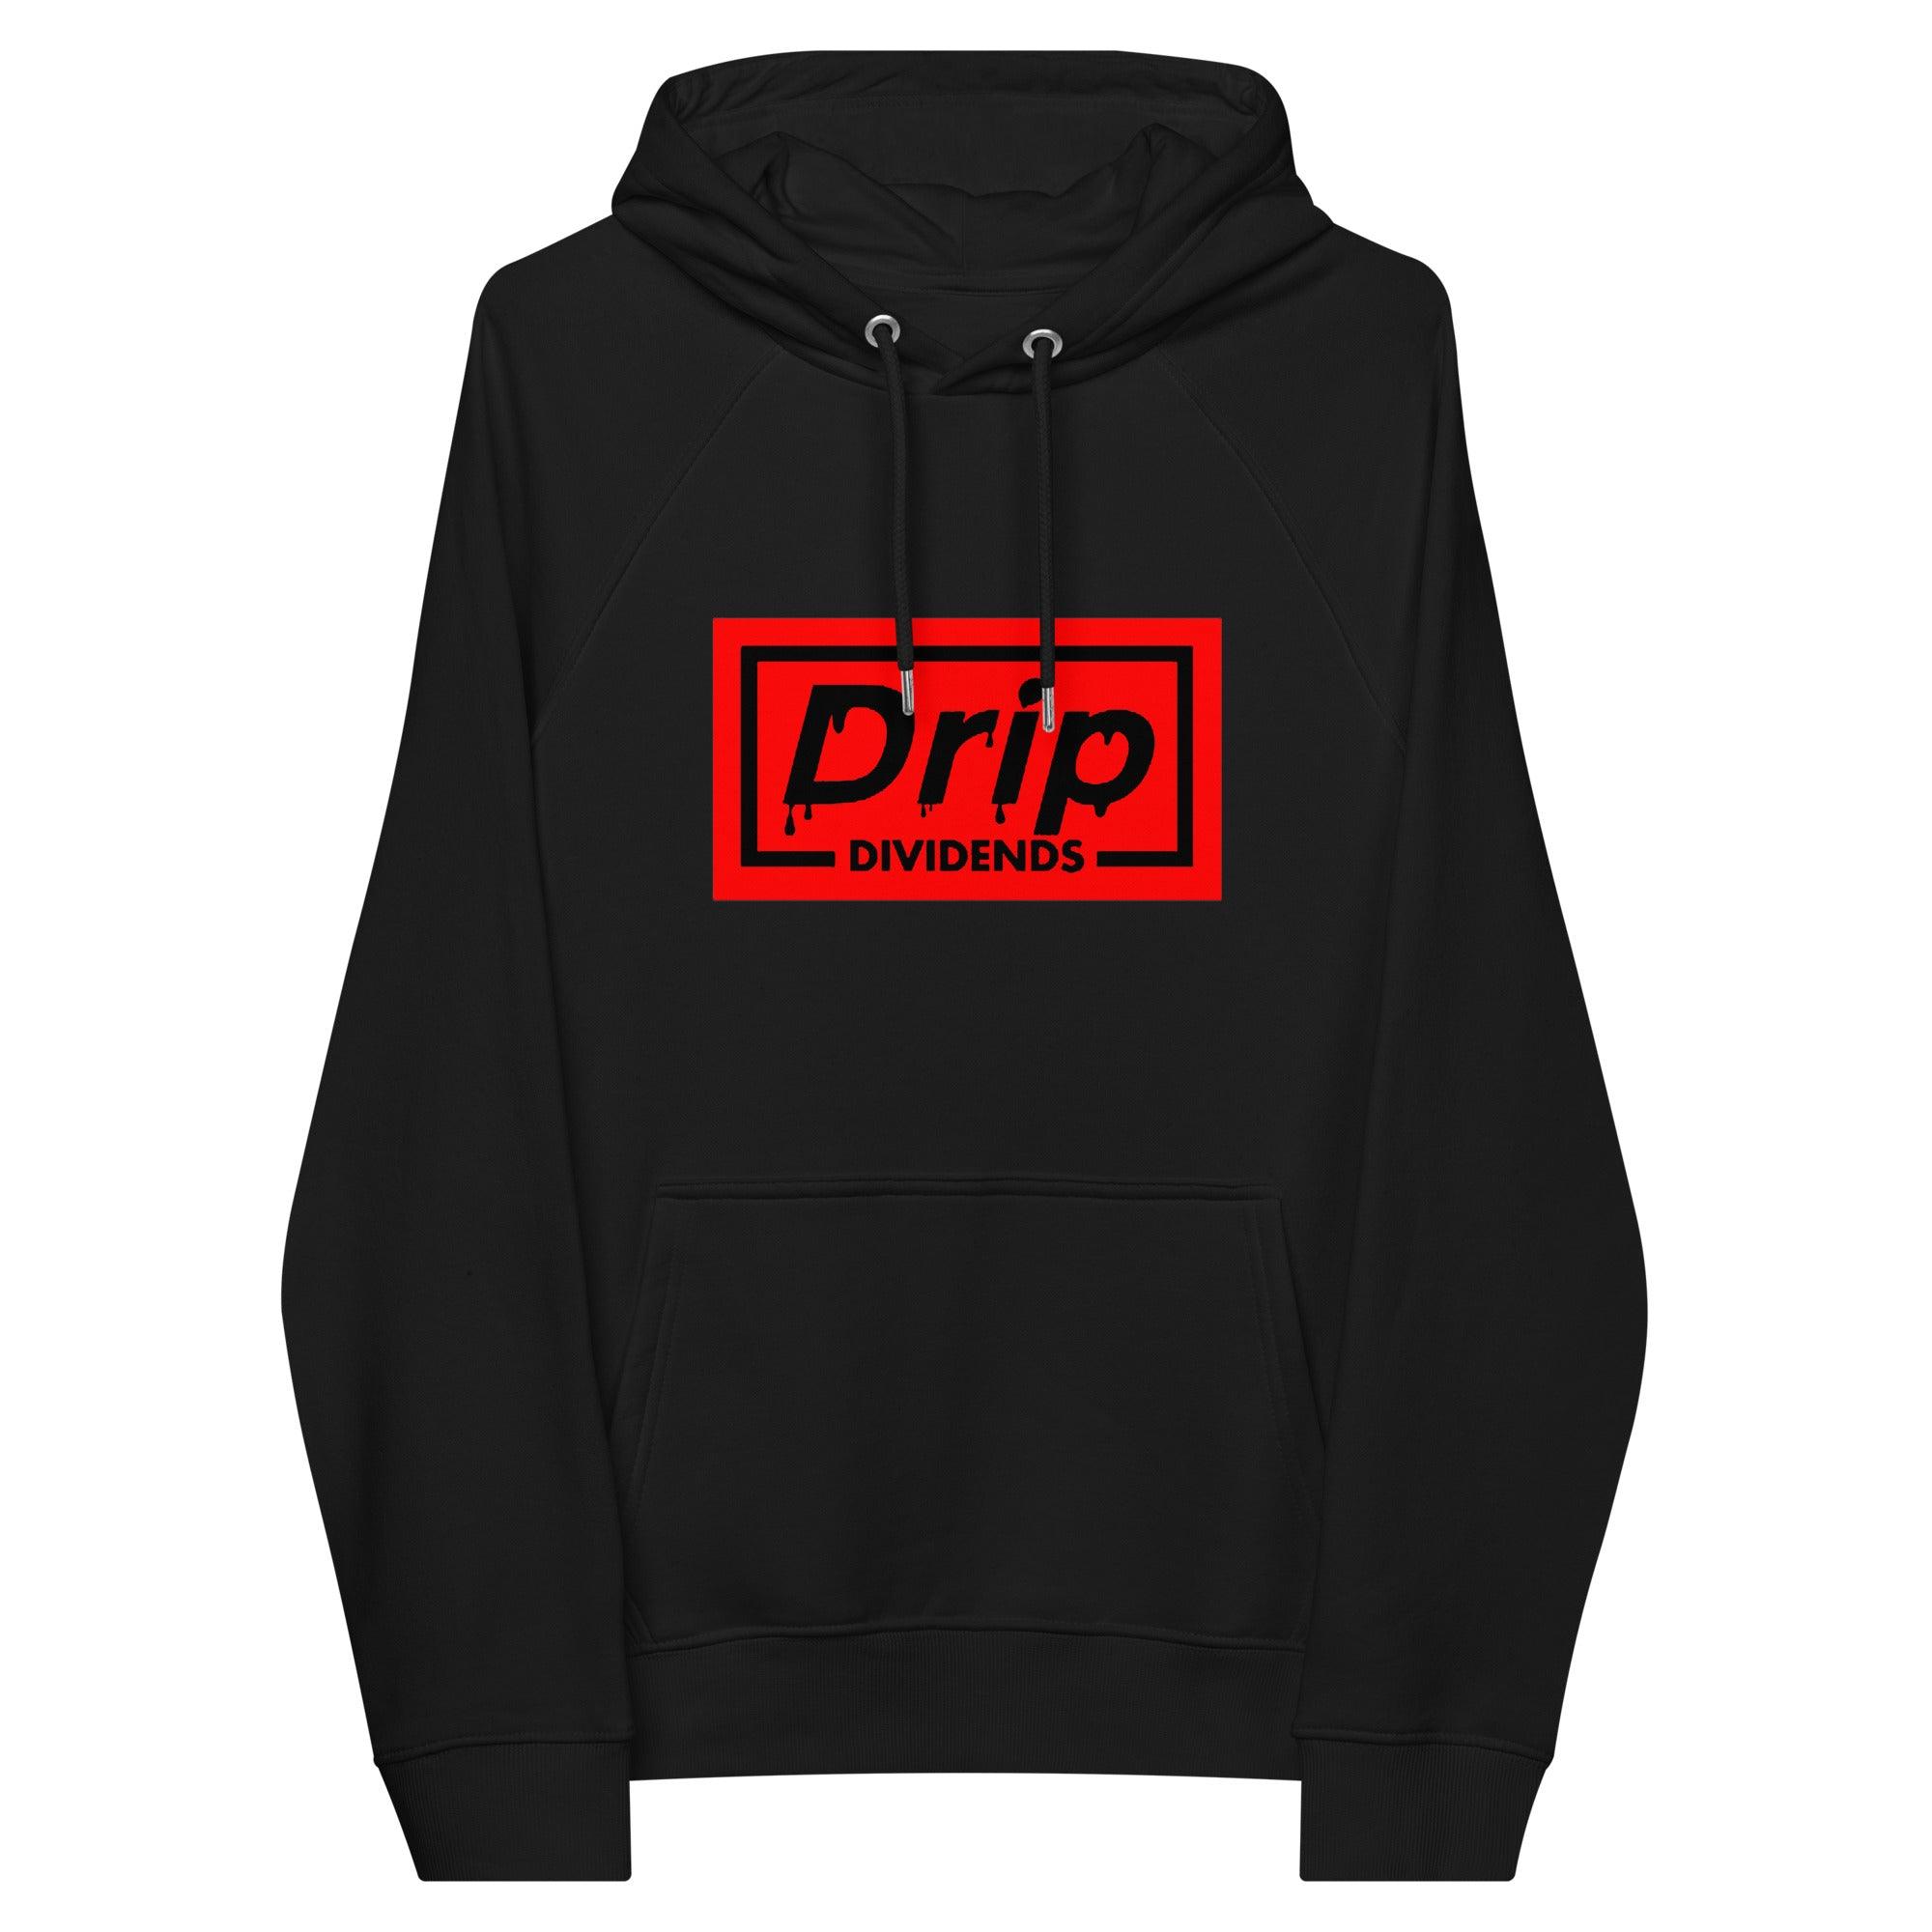 DRIP | Dividends Pullover Hoodie - InvestmenTees